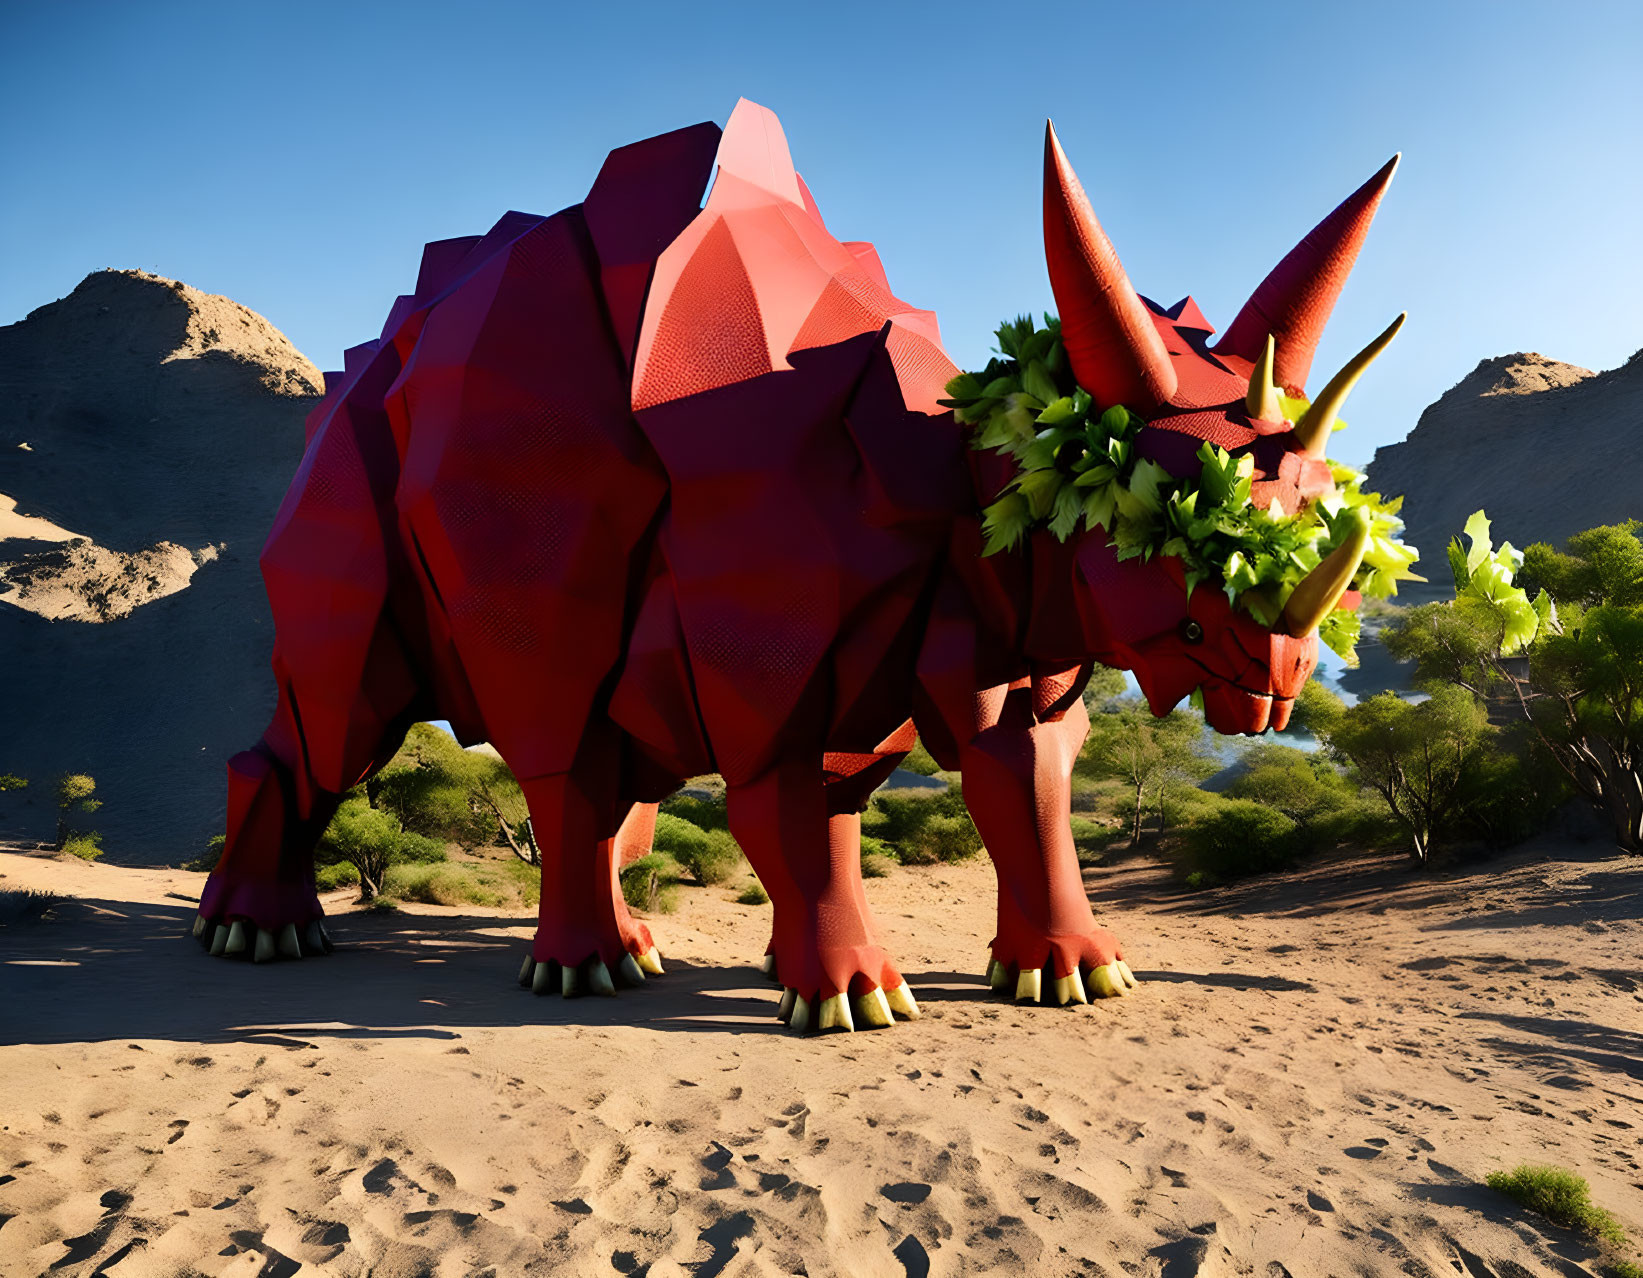 Red low-poly triceratops with green leafy ornaments in desert setting